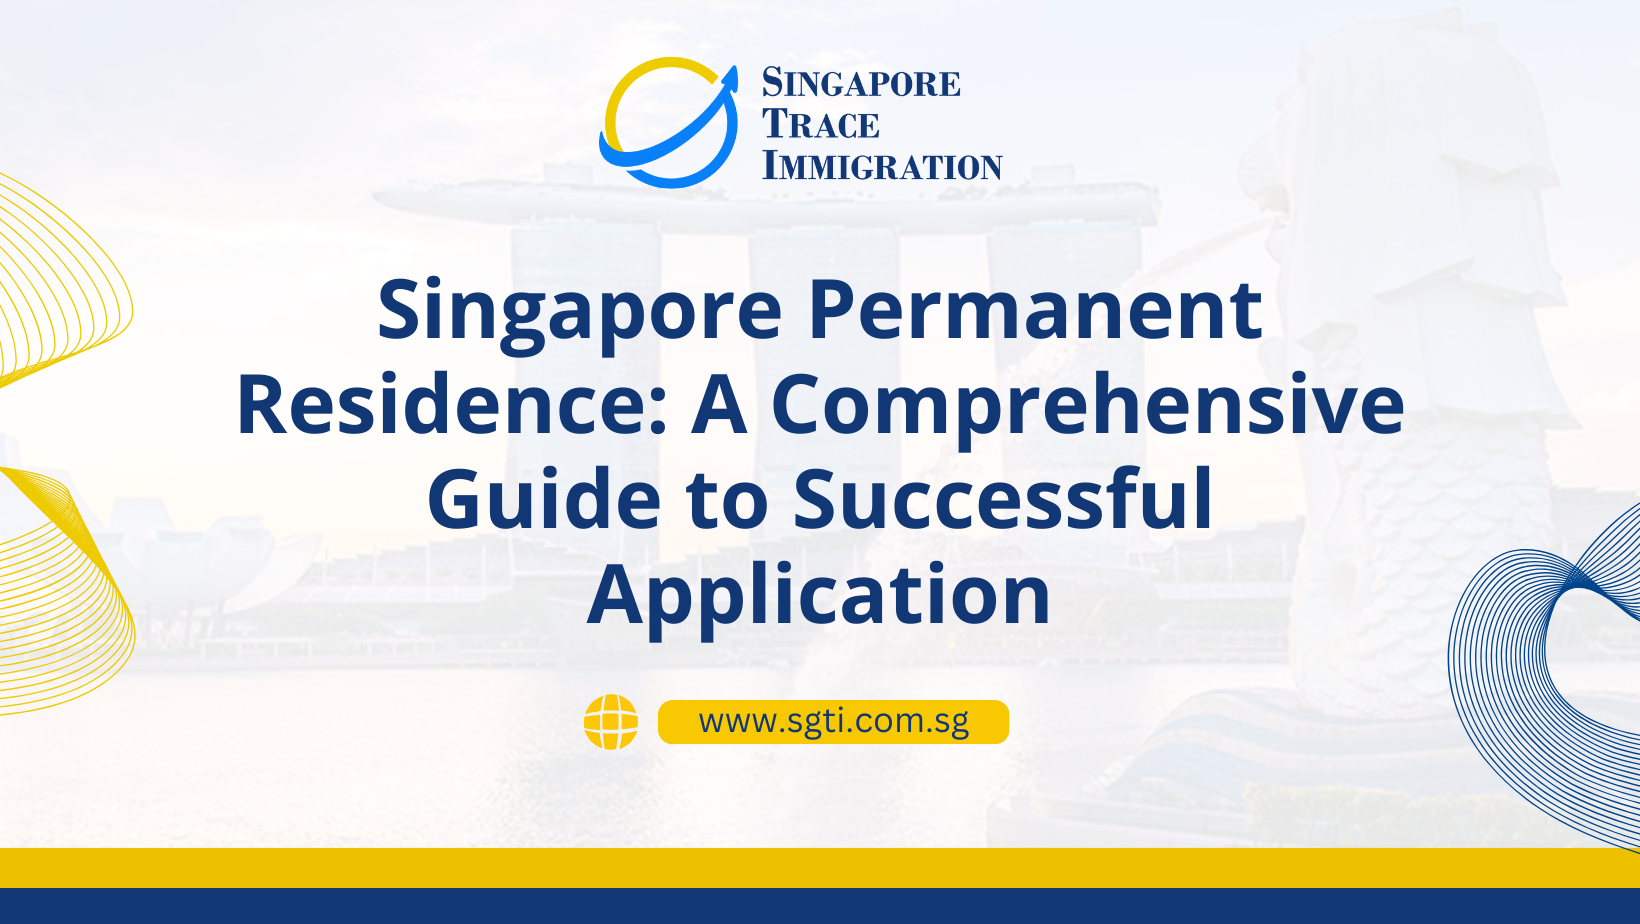 Singapore Permanent Residence: A Comprehensive Guide to Successful Application